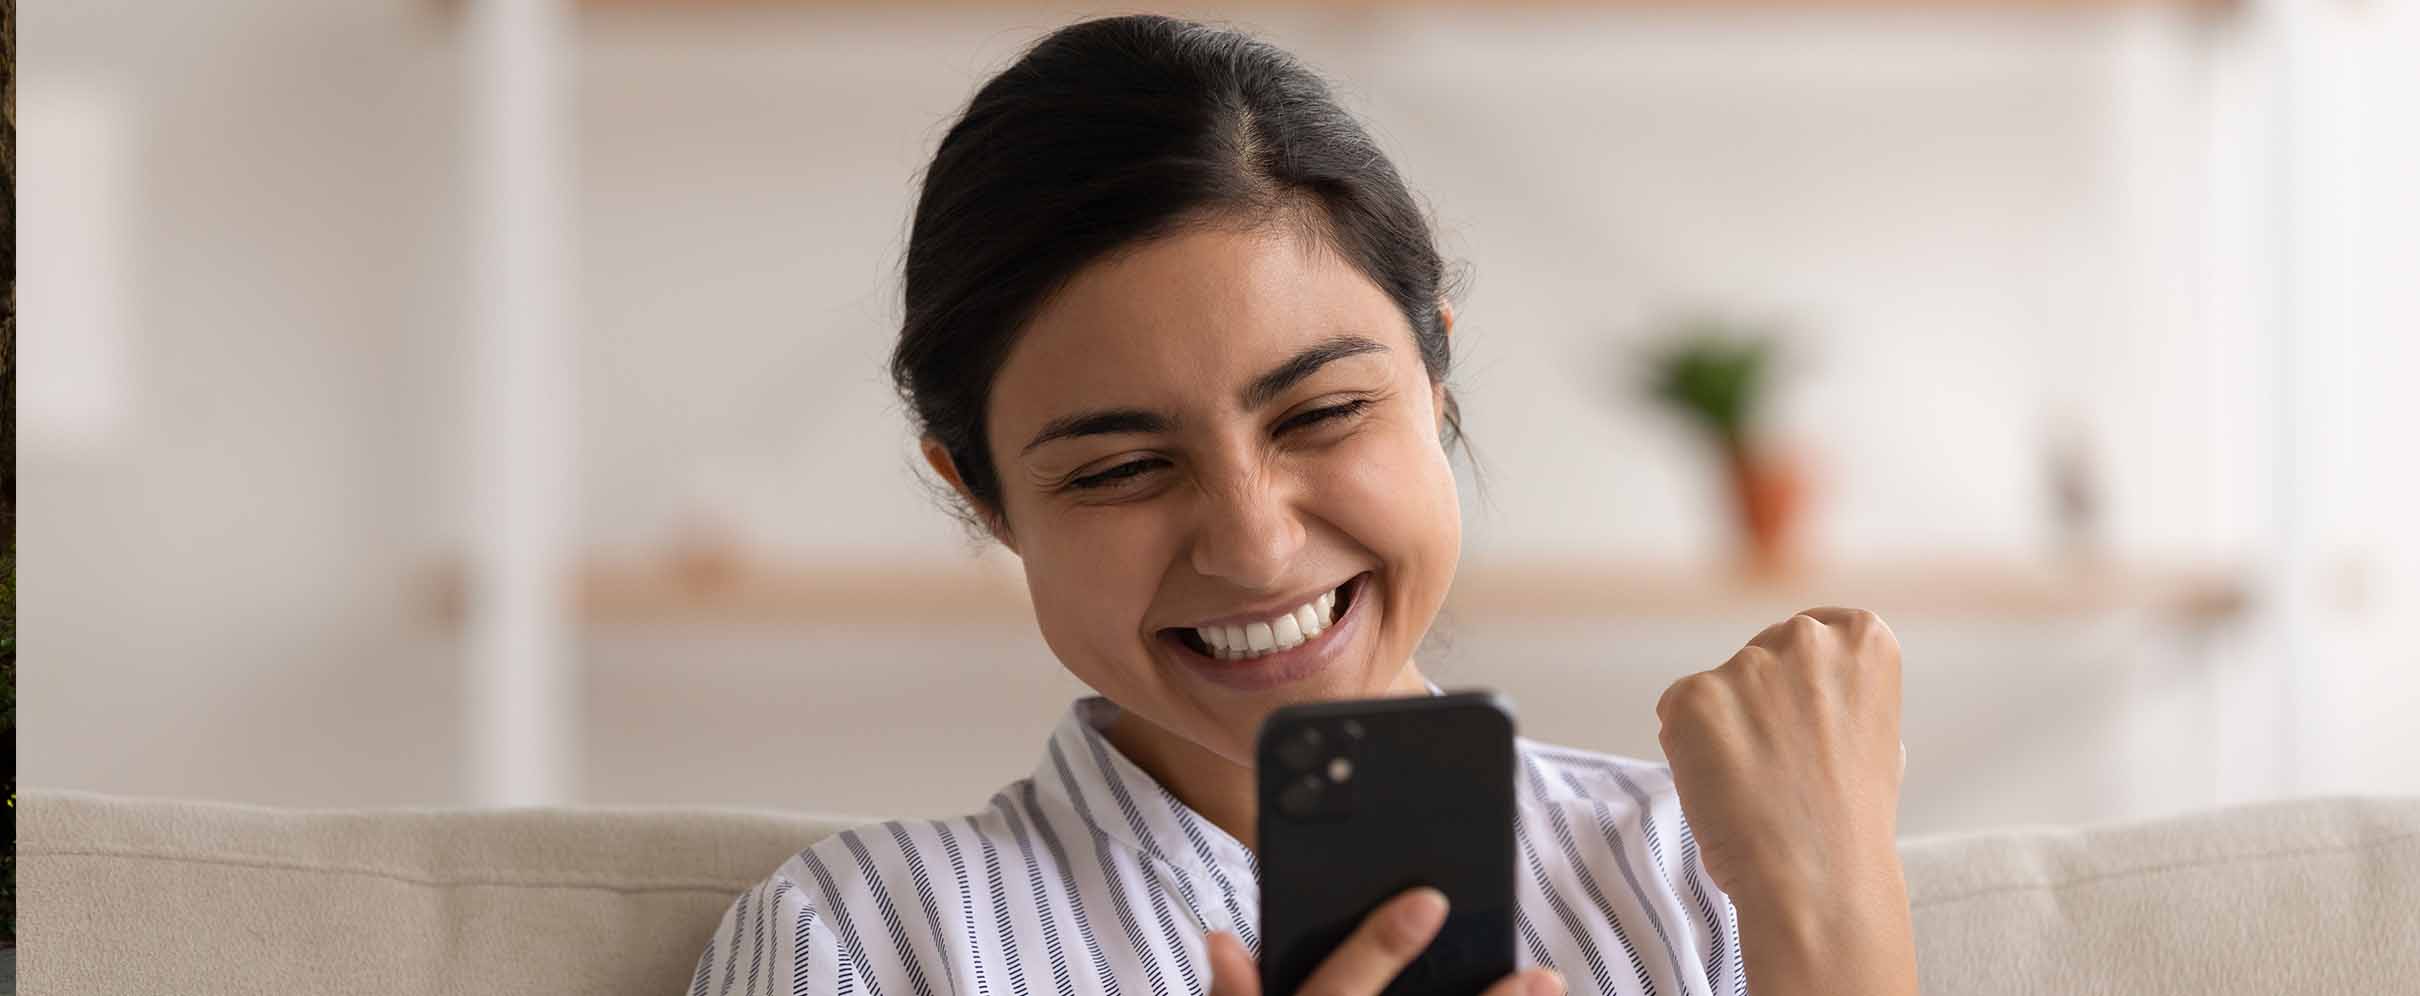 woman looking very ecstatically at a mobile phone screen